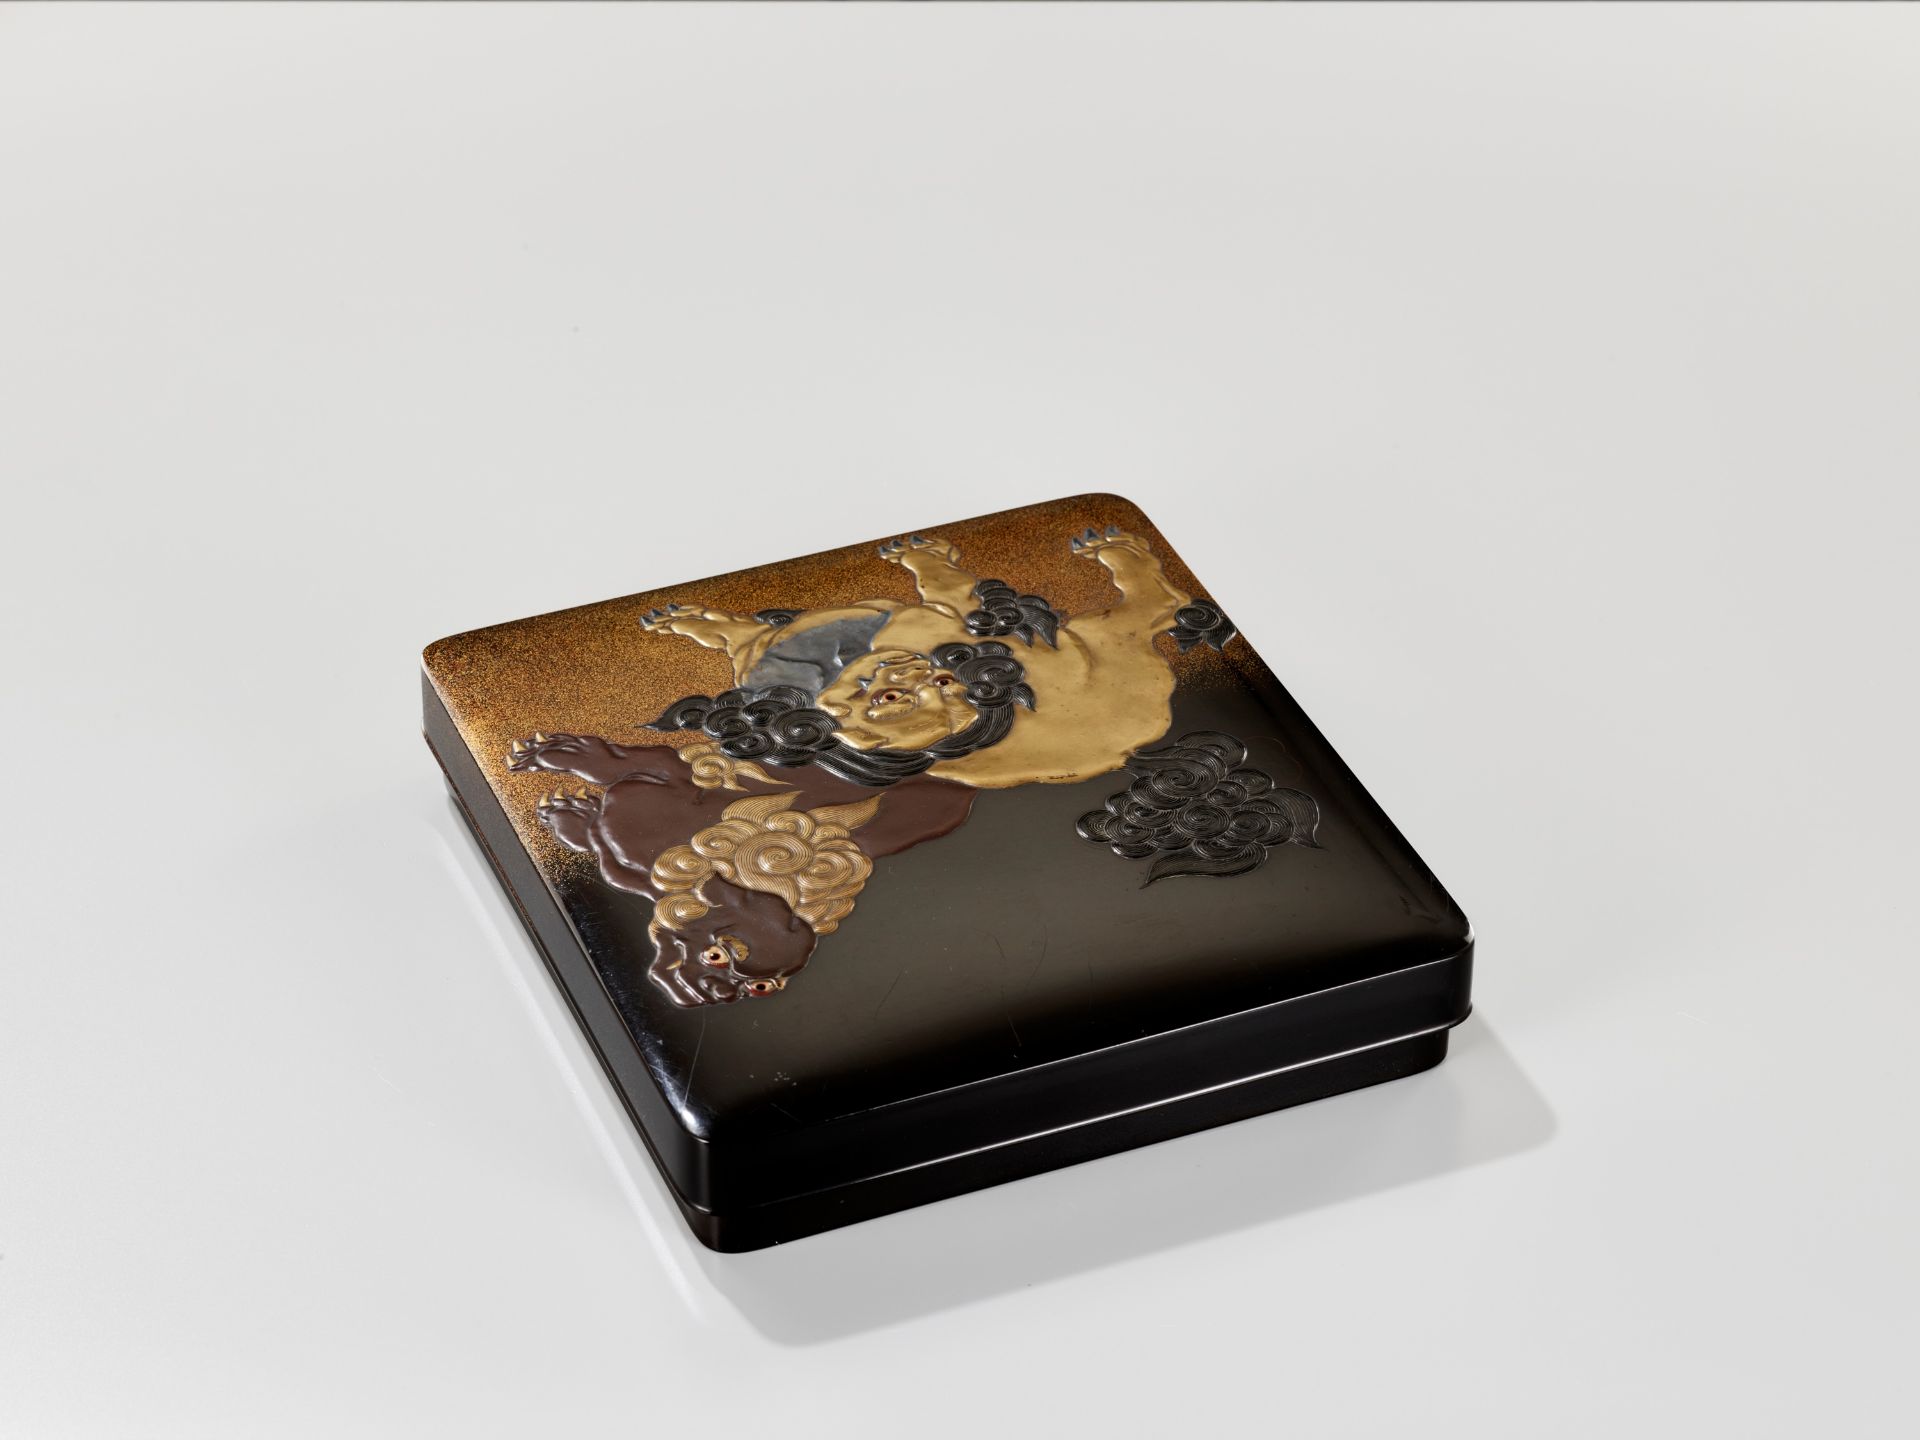 A LACQUER SUZURIBAKO DEPICTING SHISHI AND HOTEI - Image 8 of 11